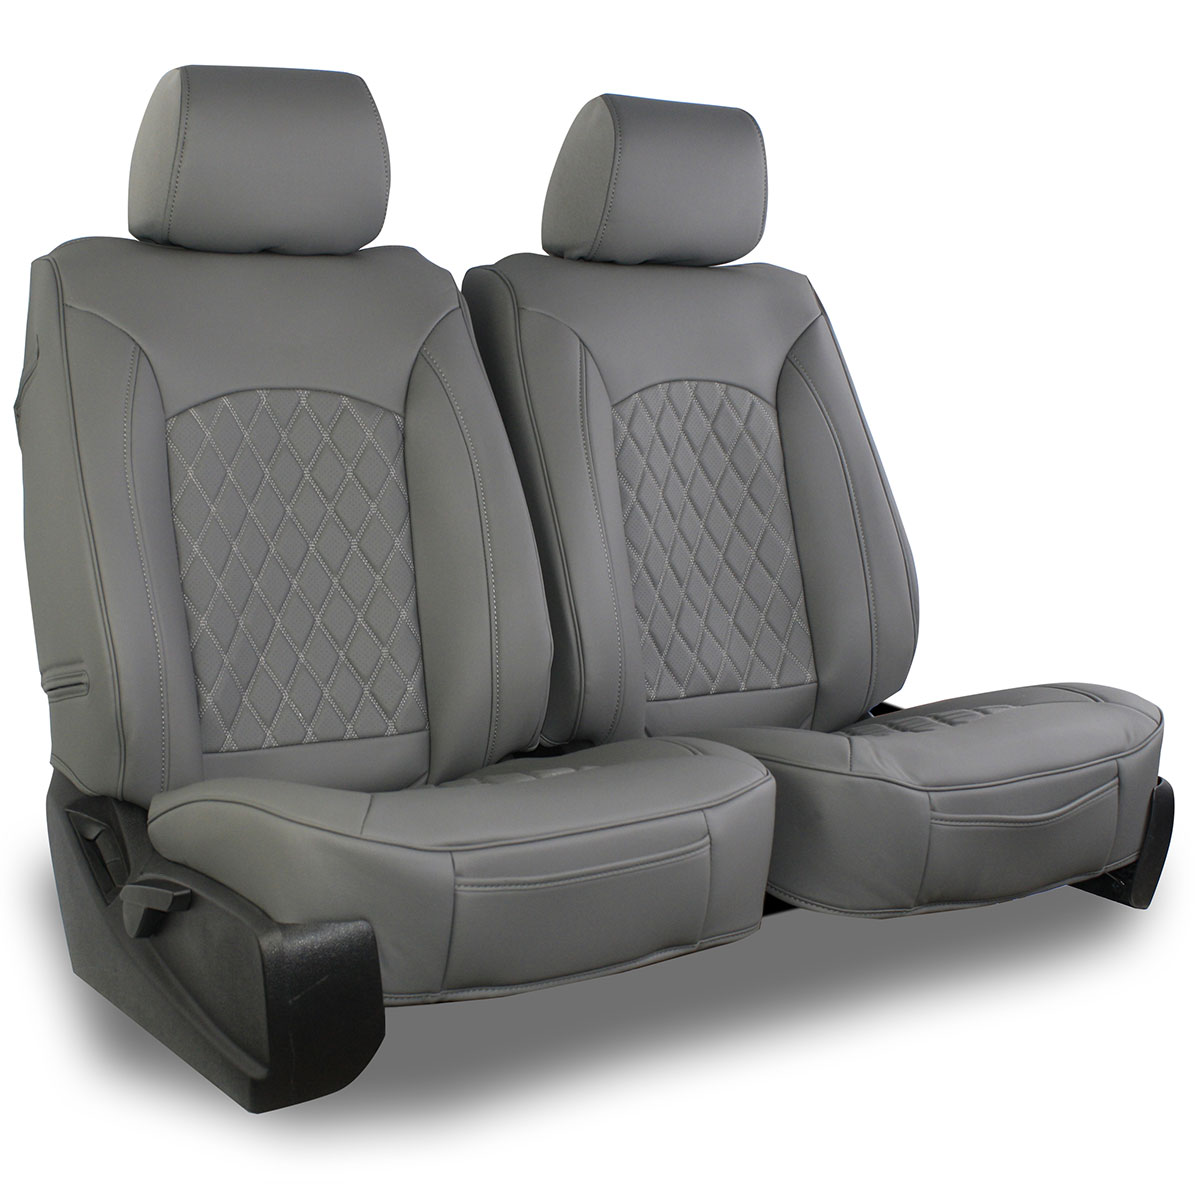 Car seat cover Highback, car seat cover single seat with